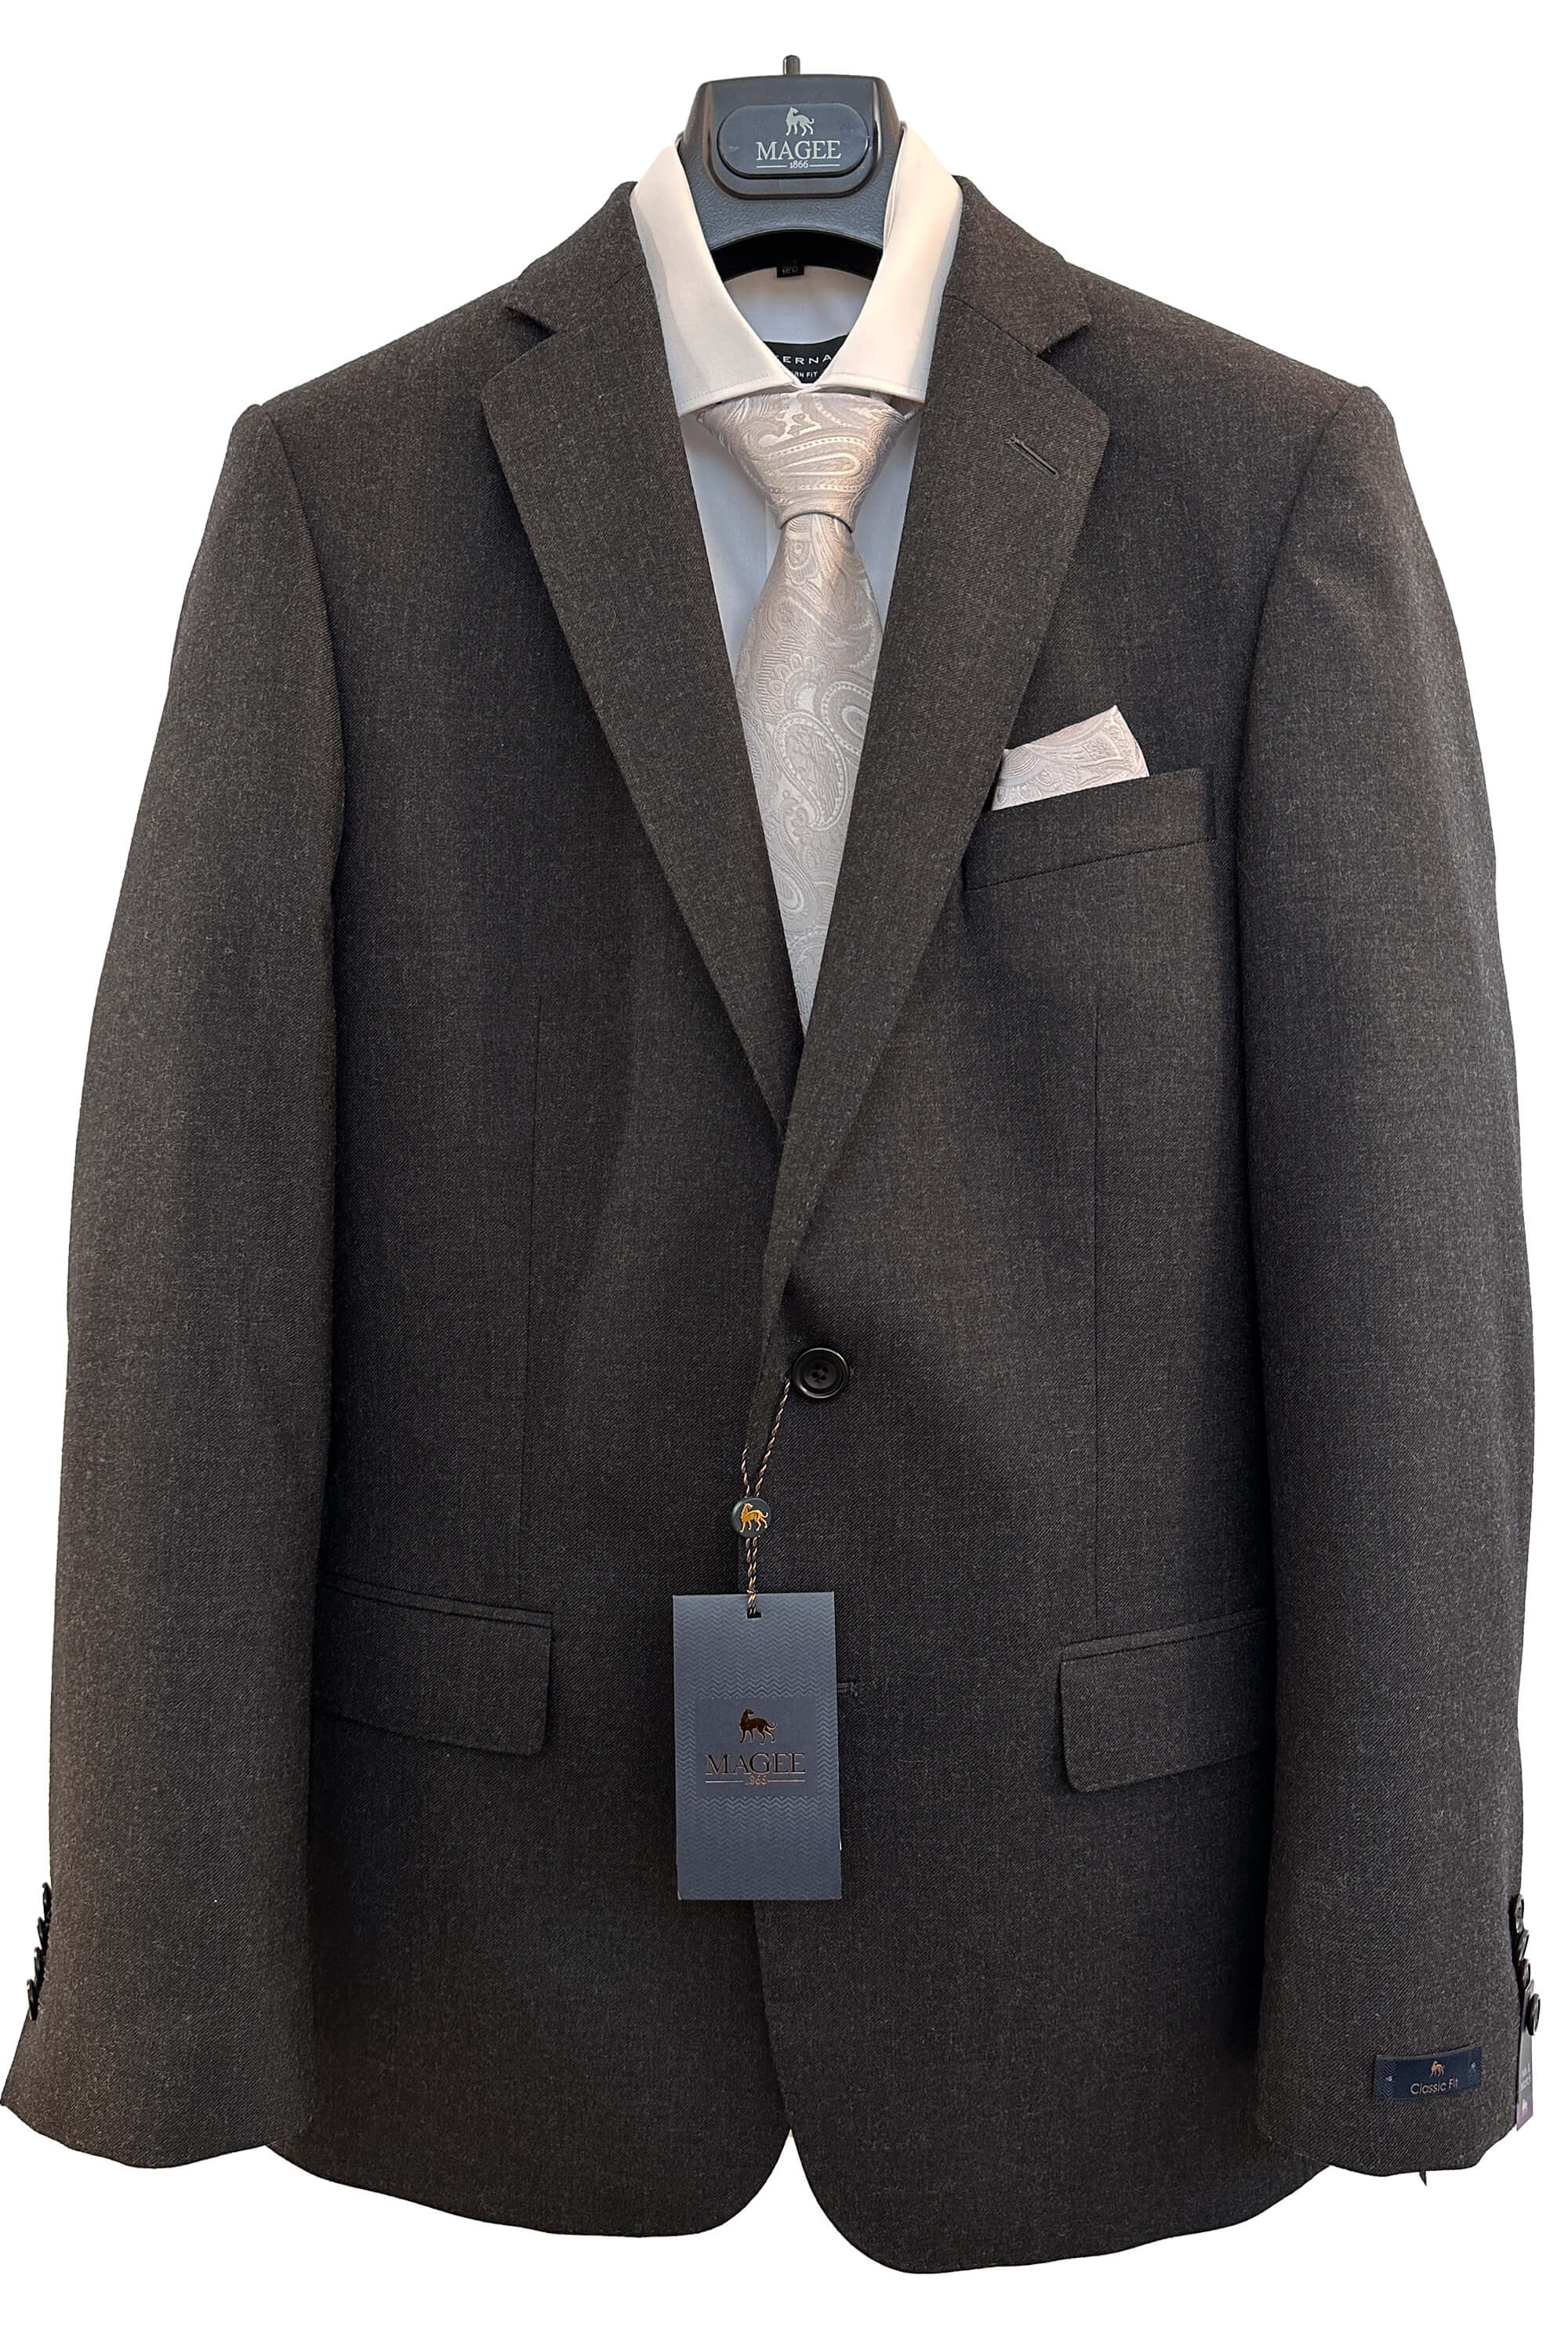 Magee Classic Fit Suit Charcoal Grey